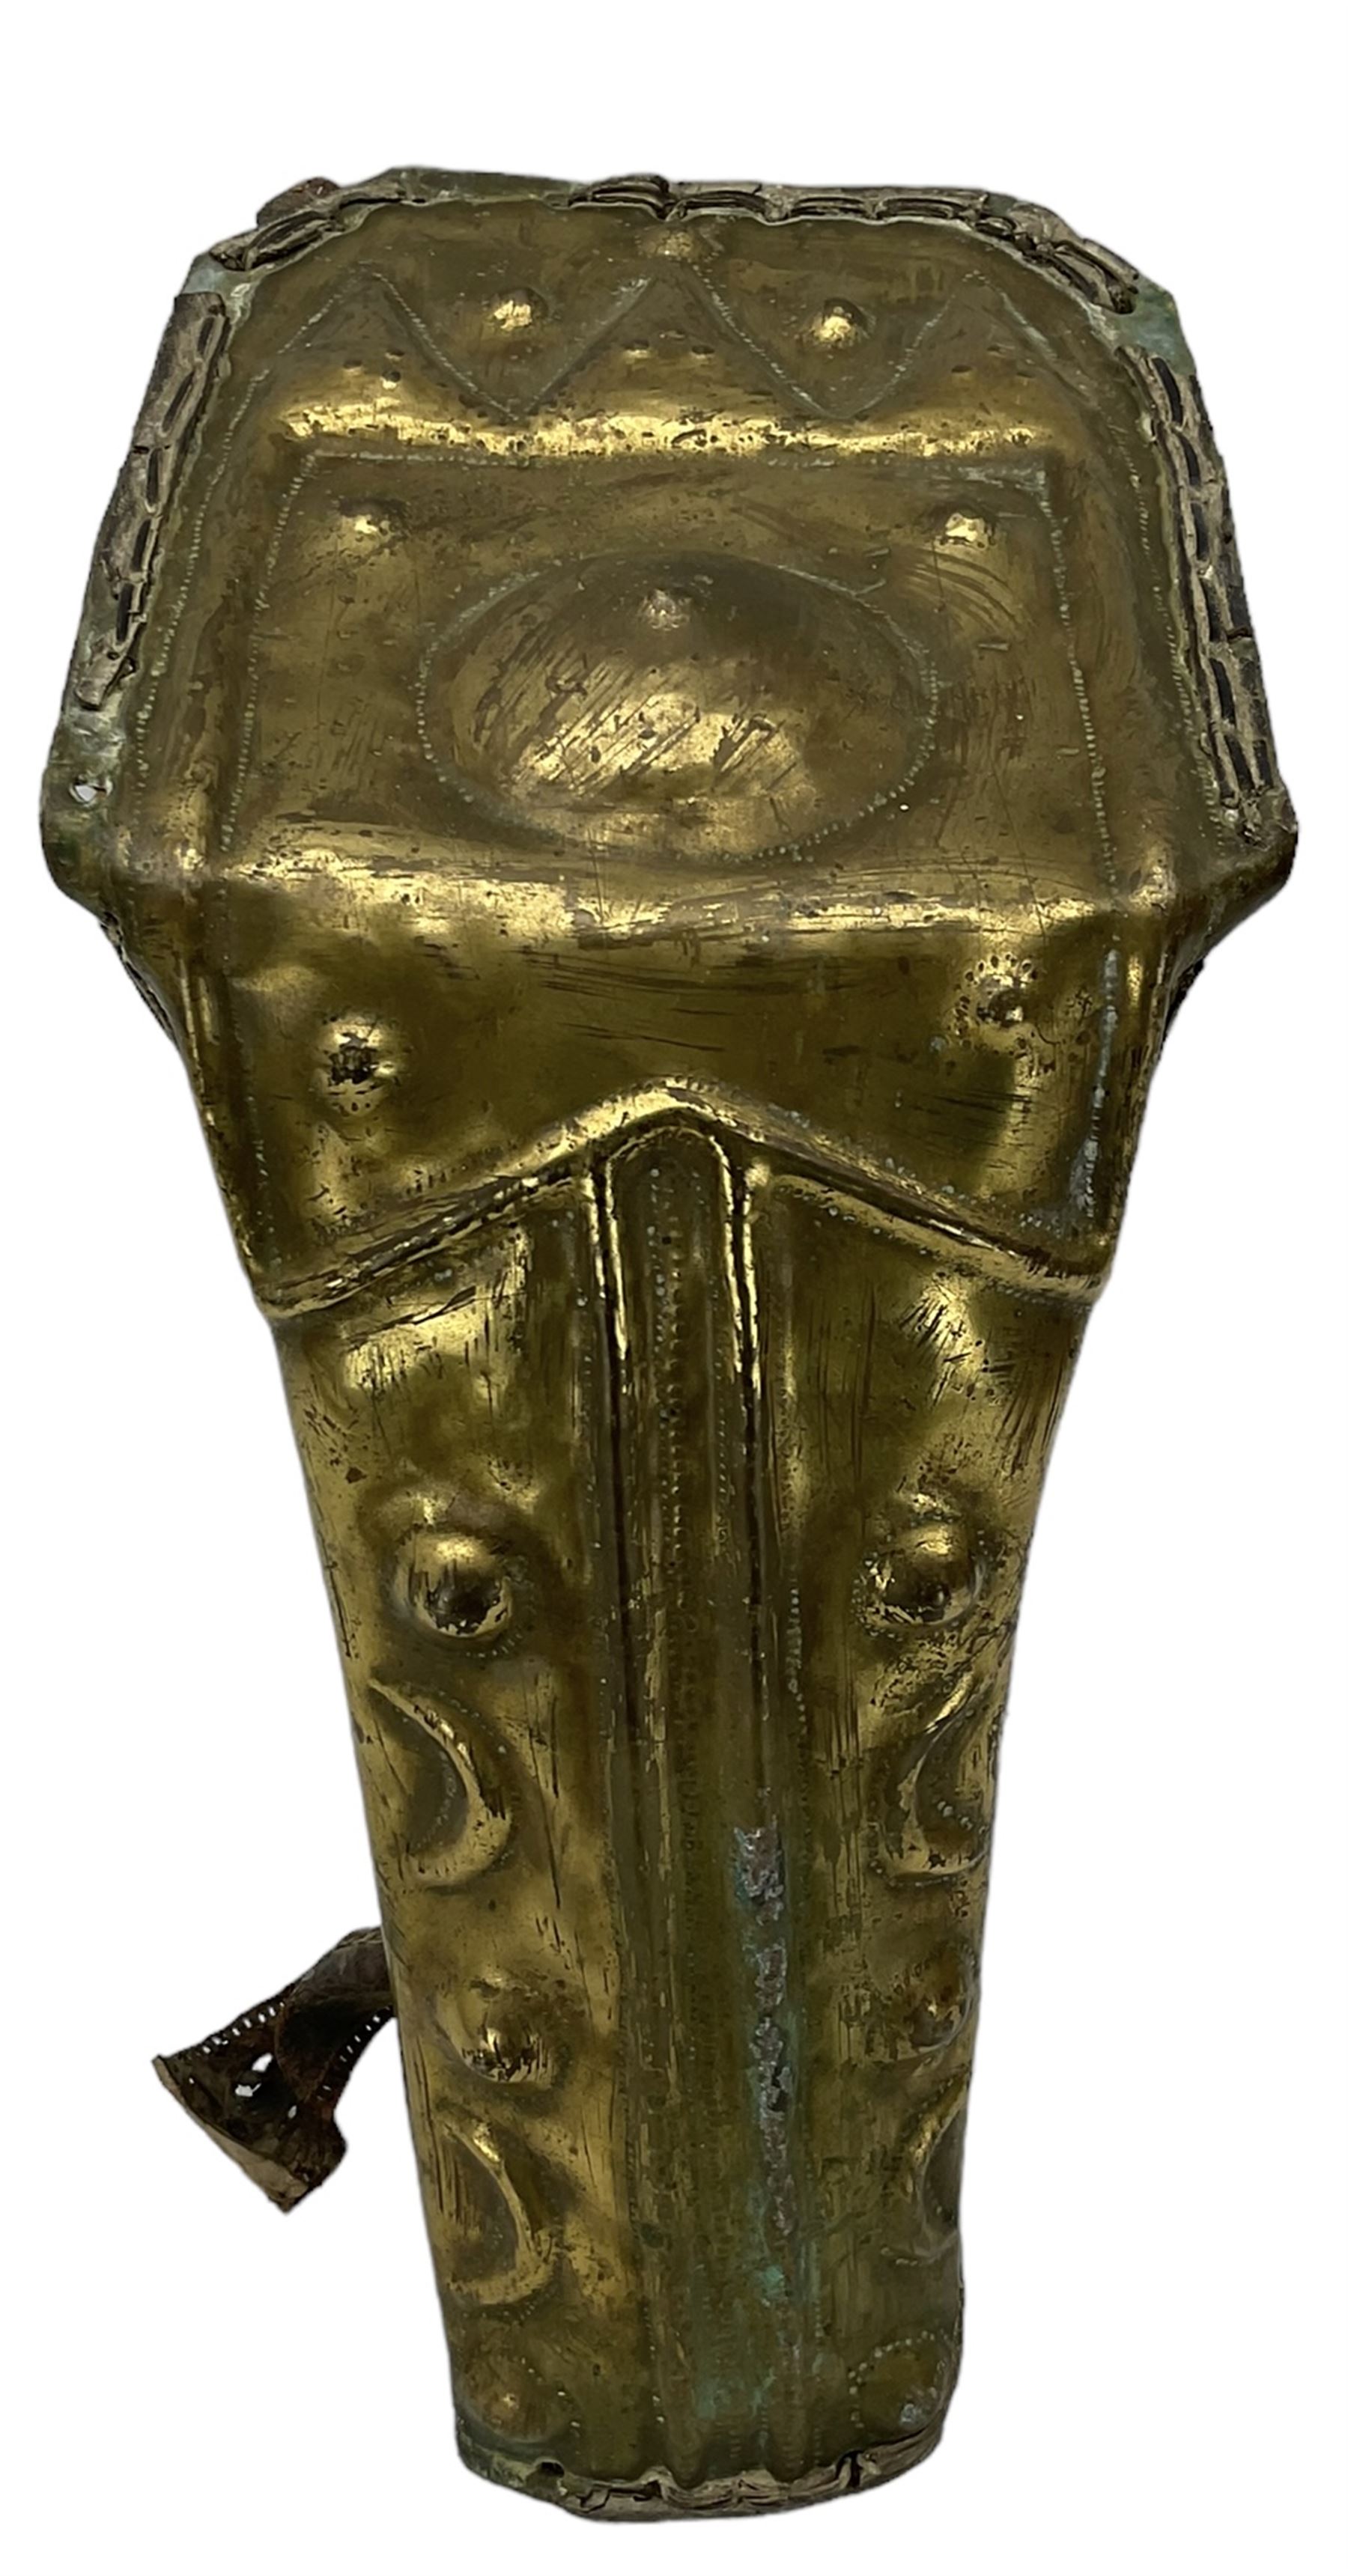 19th century Sudanese brass camel Chanfron with raised decoration